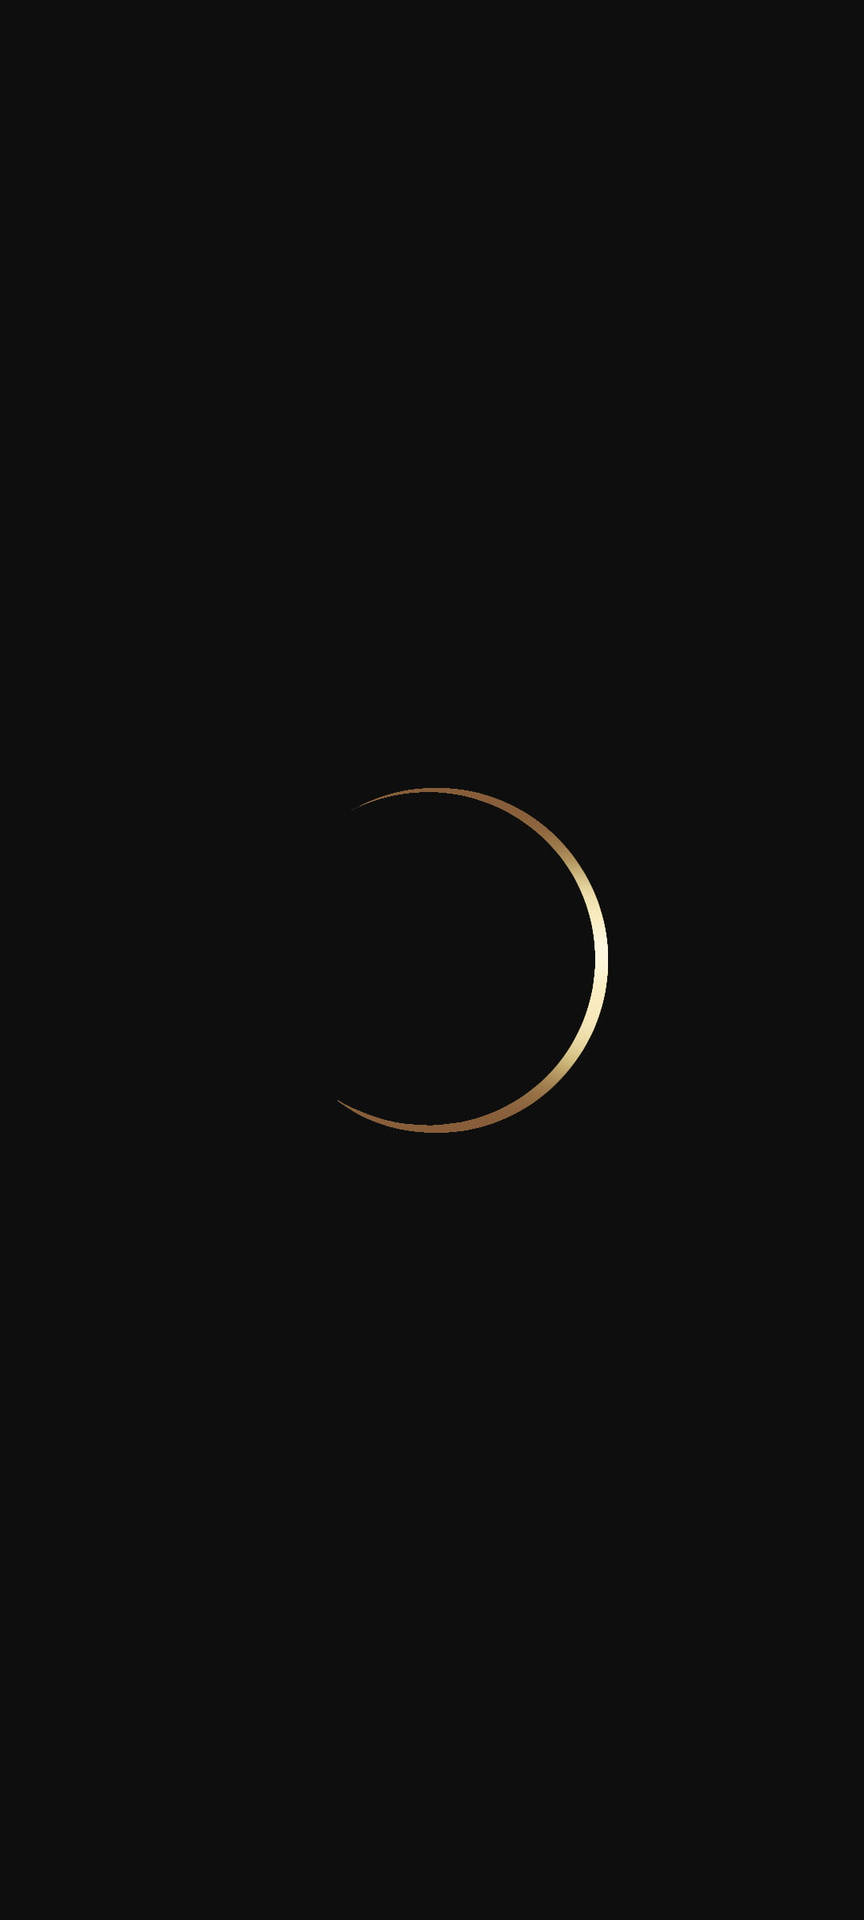 Crescent Moon Black And Gold Iphone Wallpaper